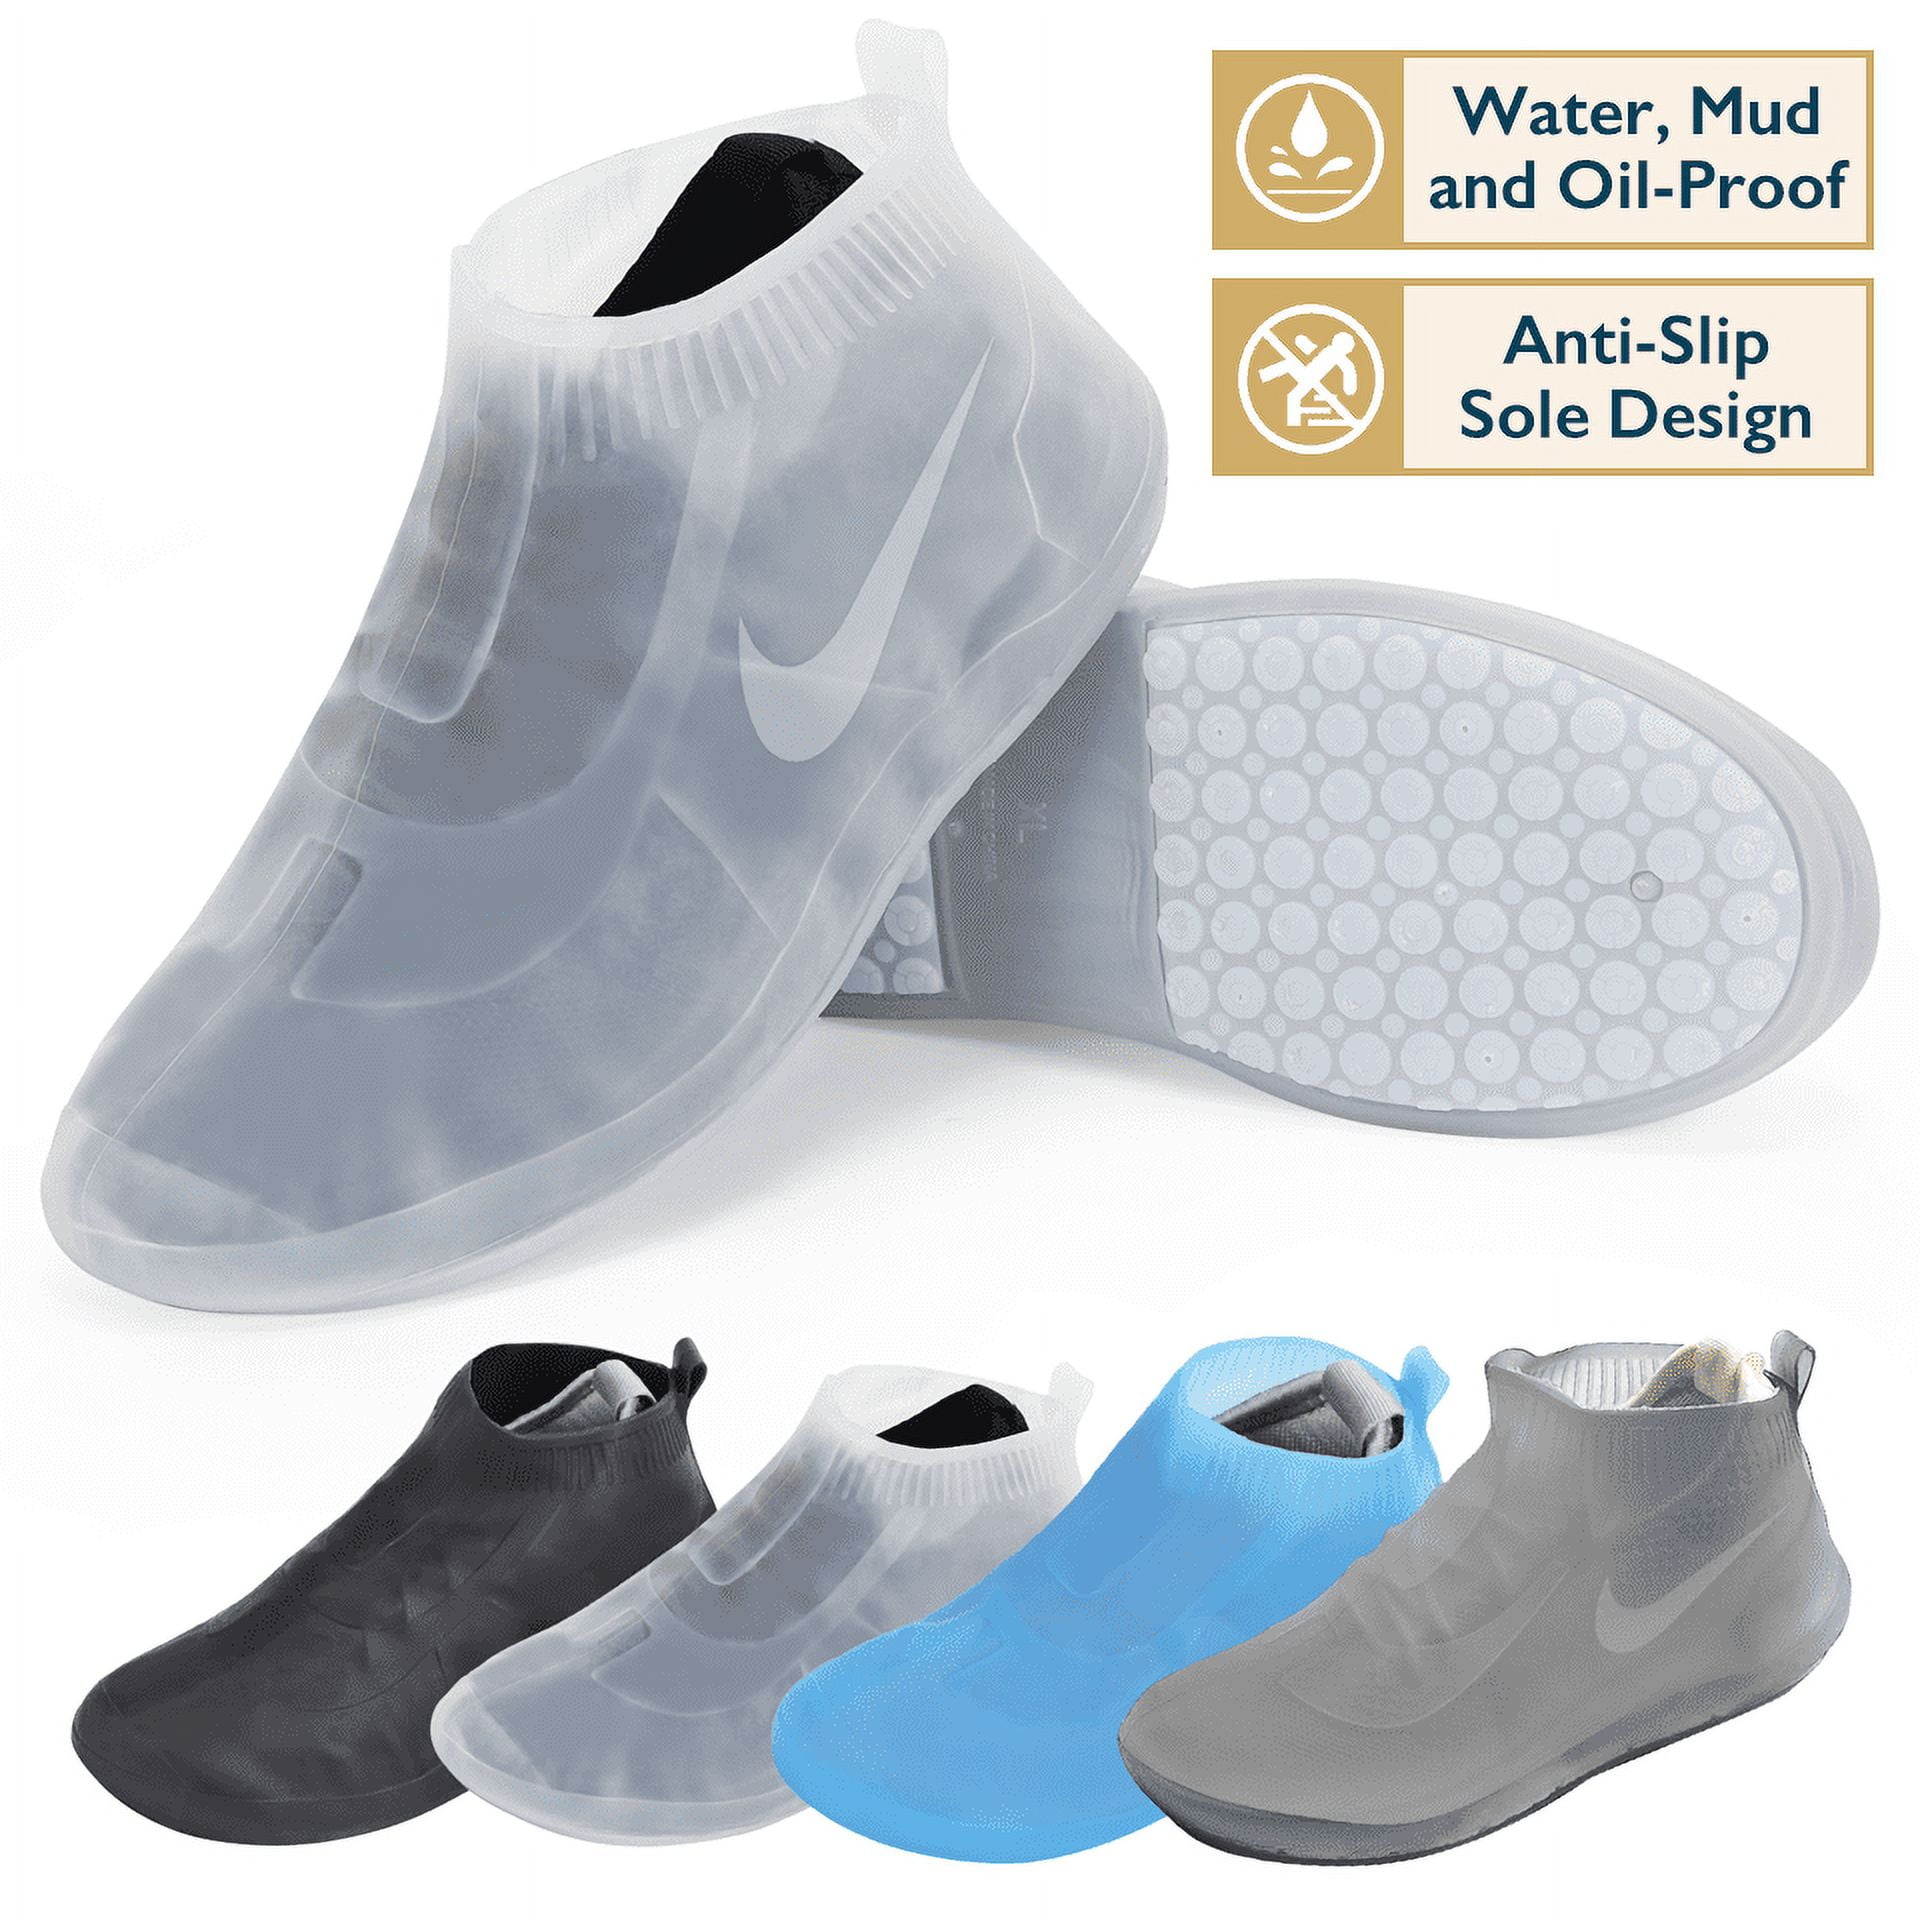 Nobby Hub Reusable Waterproof Silicone Shoe Covers for Kids, Men, and Women. Small